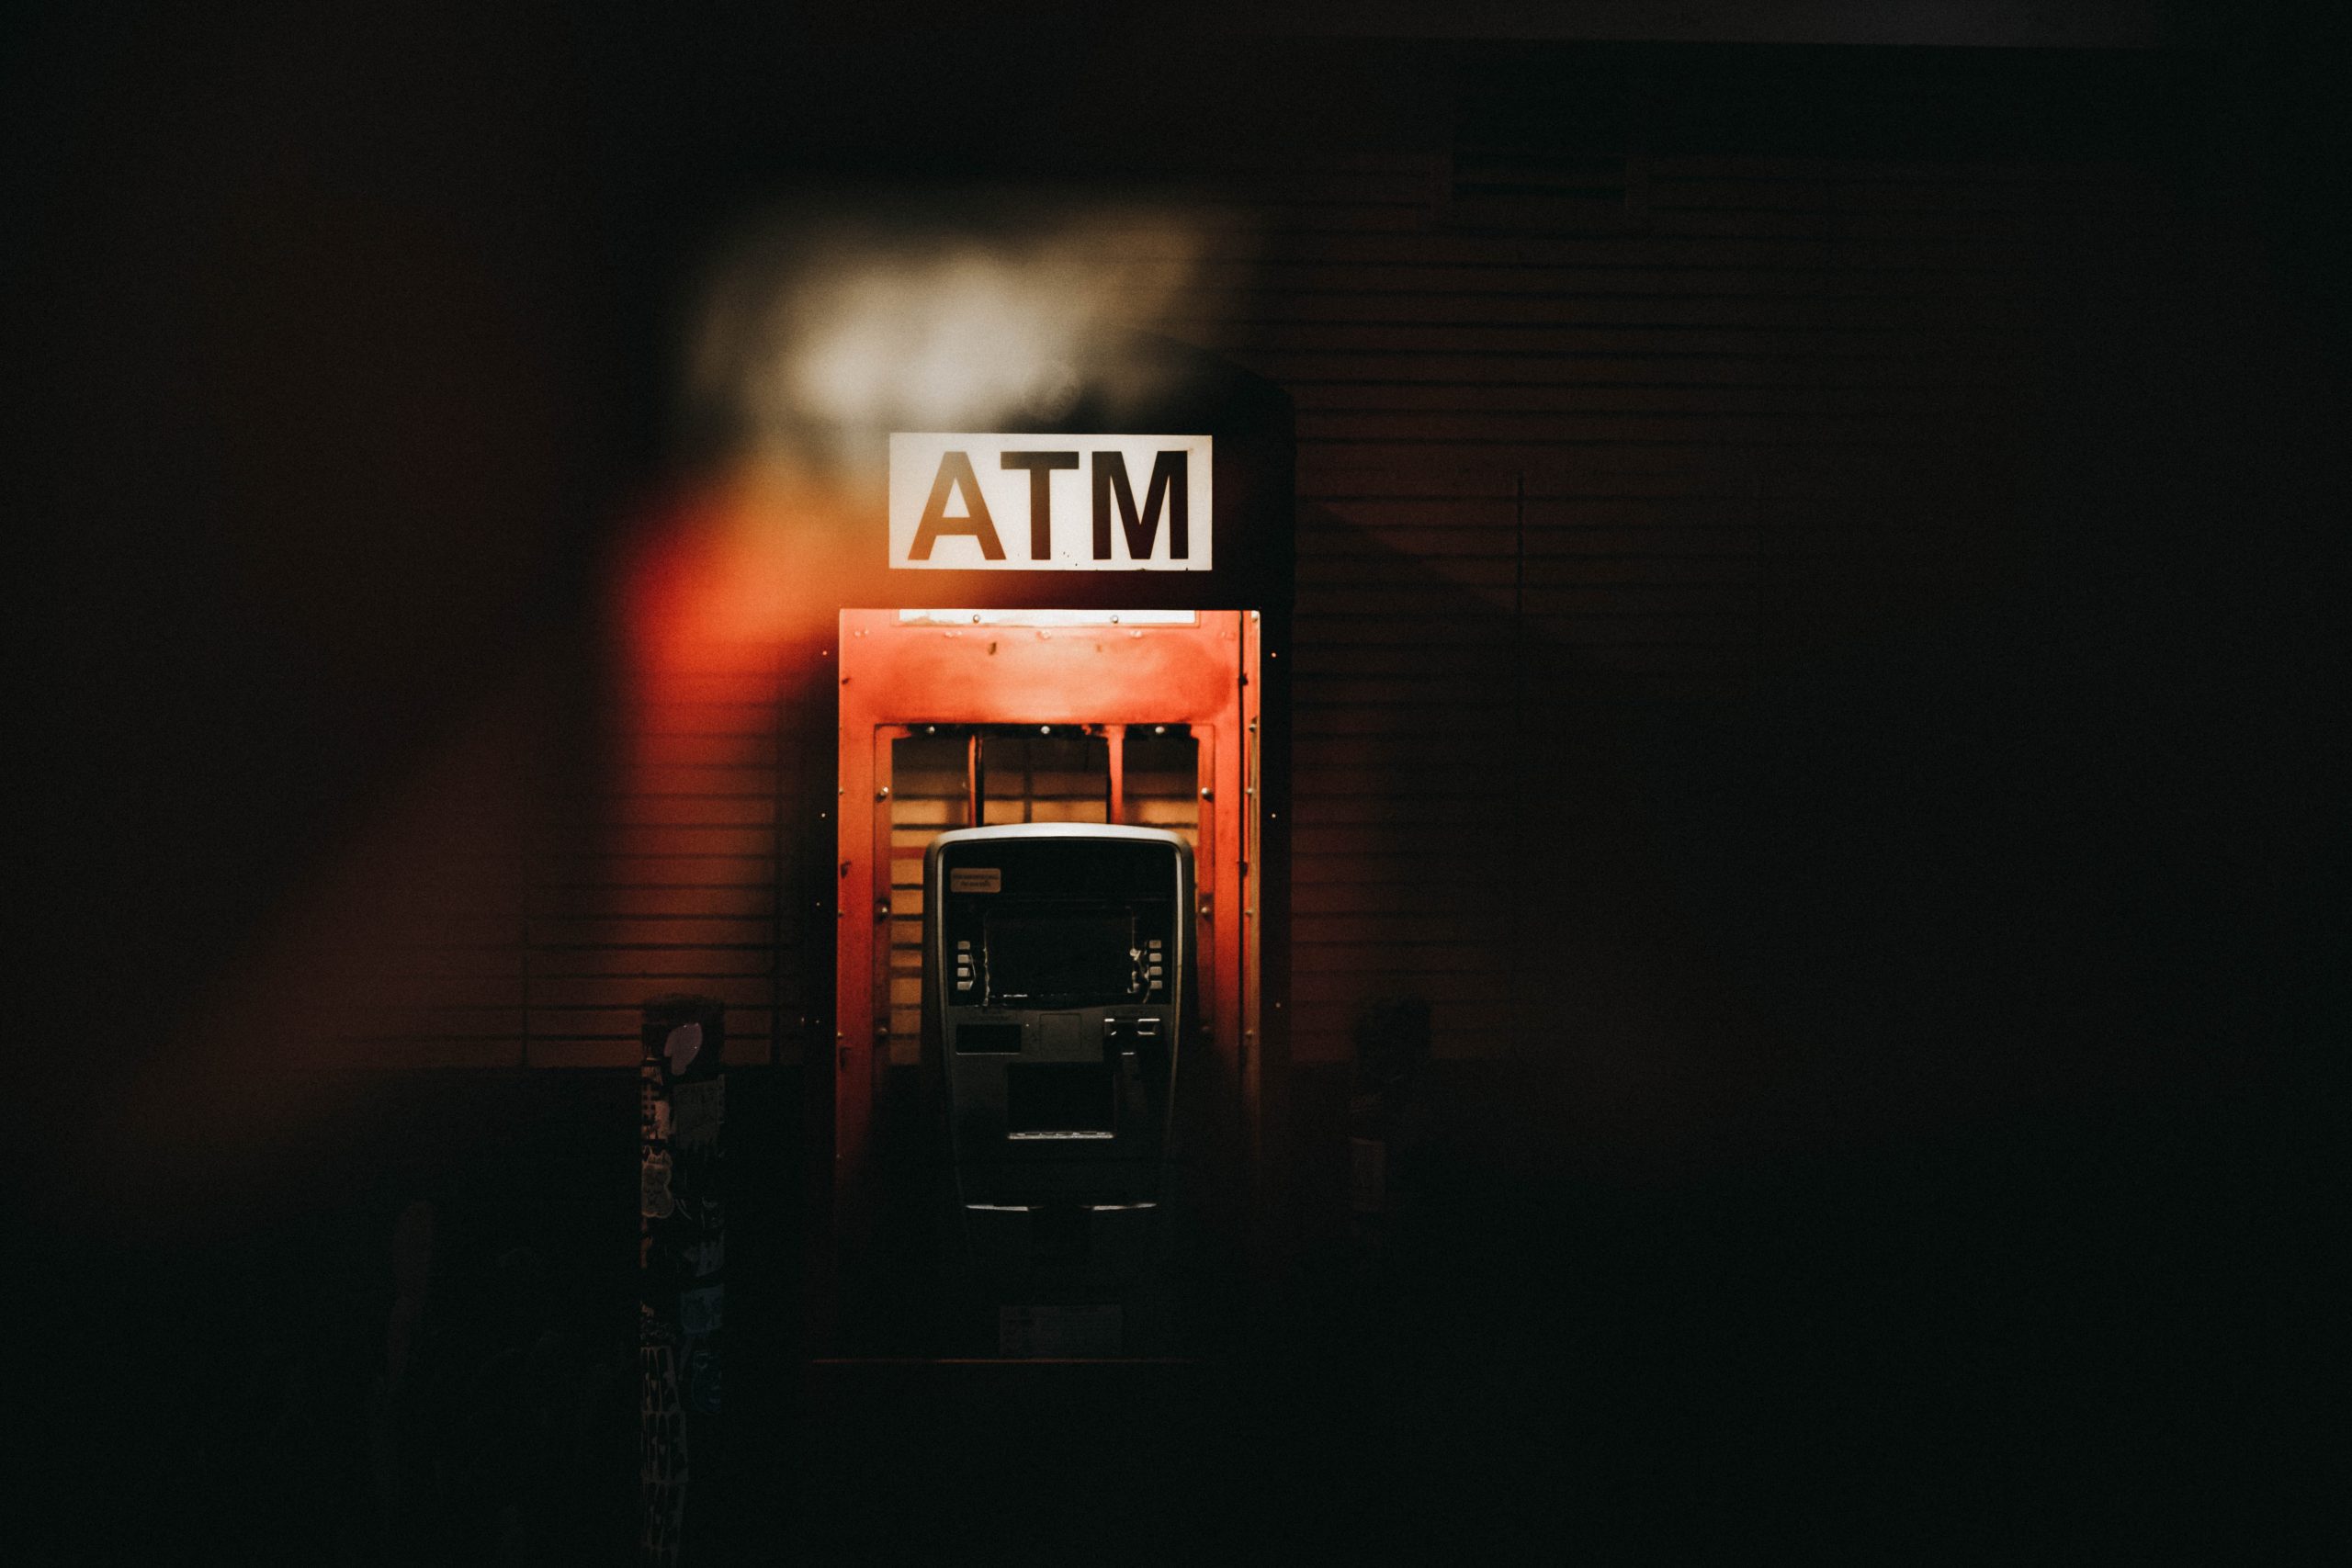 Outdoor ATM at night